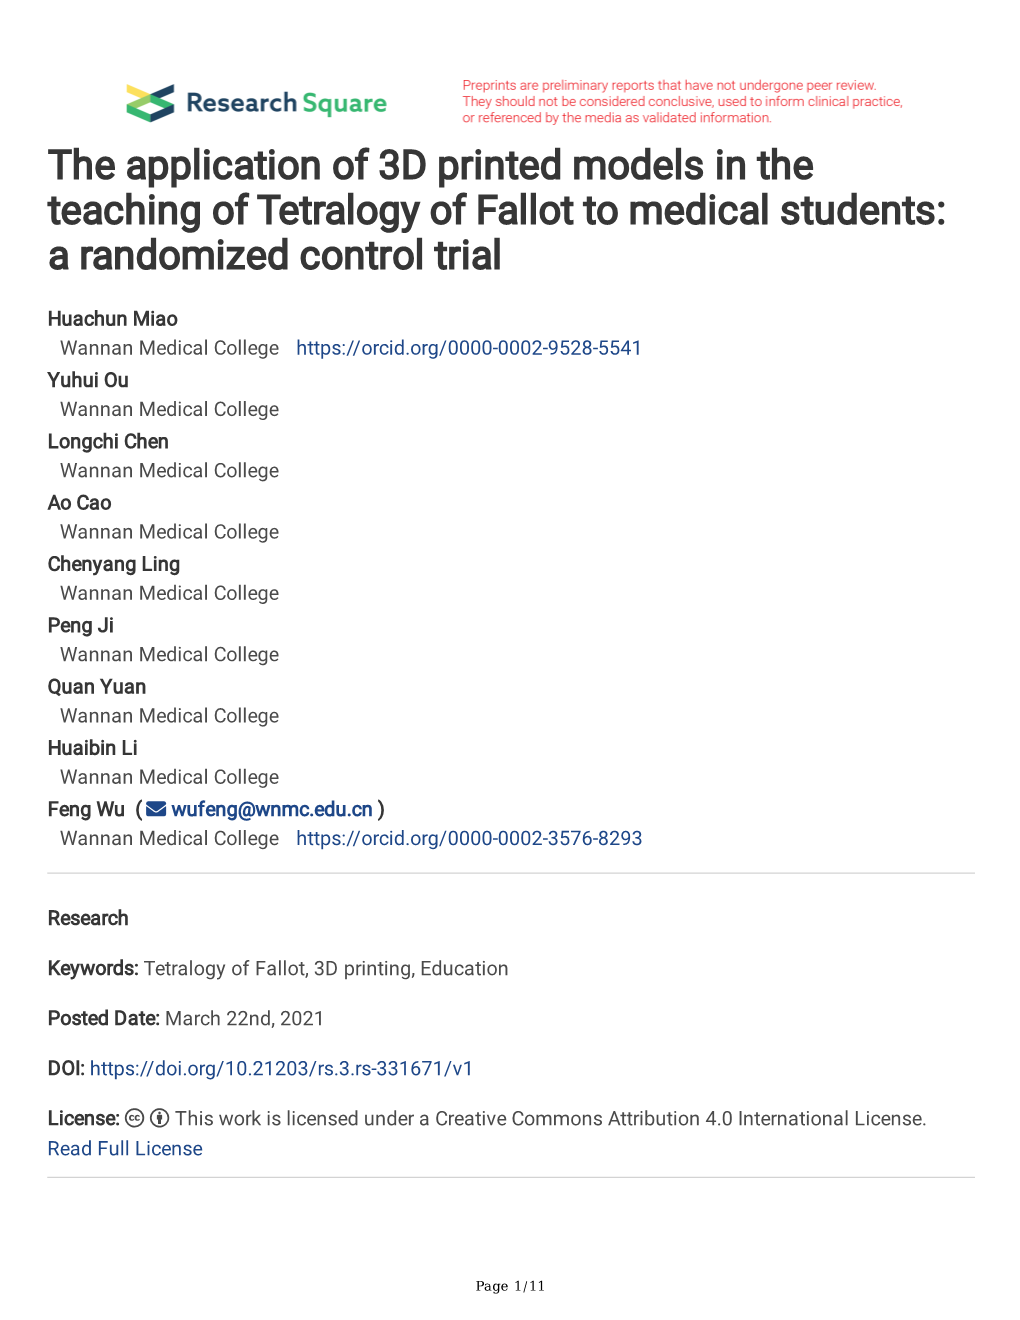 The Application of 3D Printed Models in the Teaching of Tetralogy of Fallot to Medical Students: a Randomized Control Trial